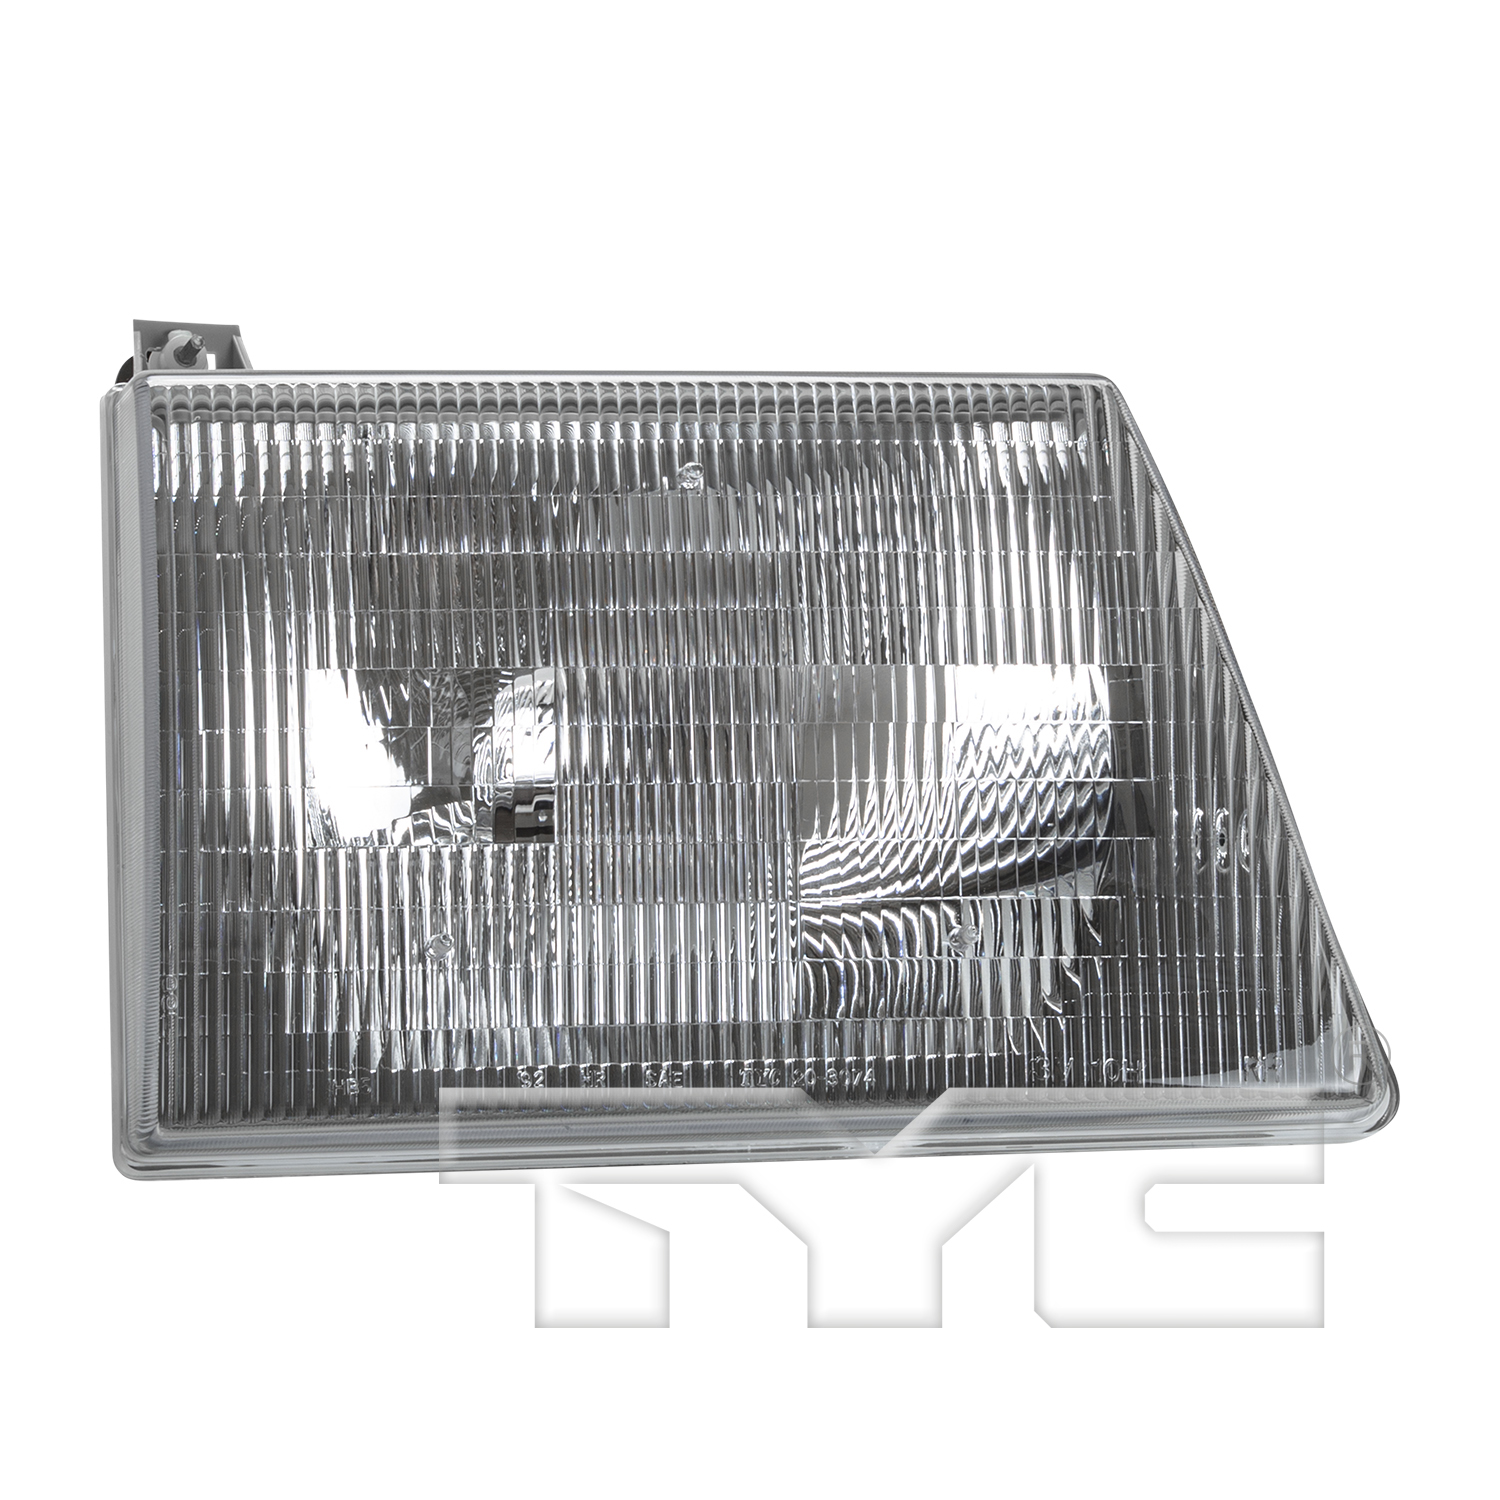 Aftermarket HEADLIGHTS for FORD - E-350 SUPER DUTY, E-350 SUPER DUTY,99-07,RT Headlamp assy composite